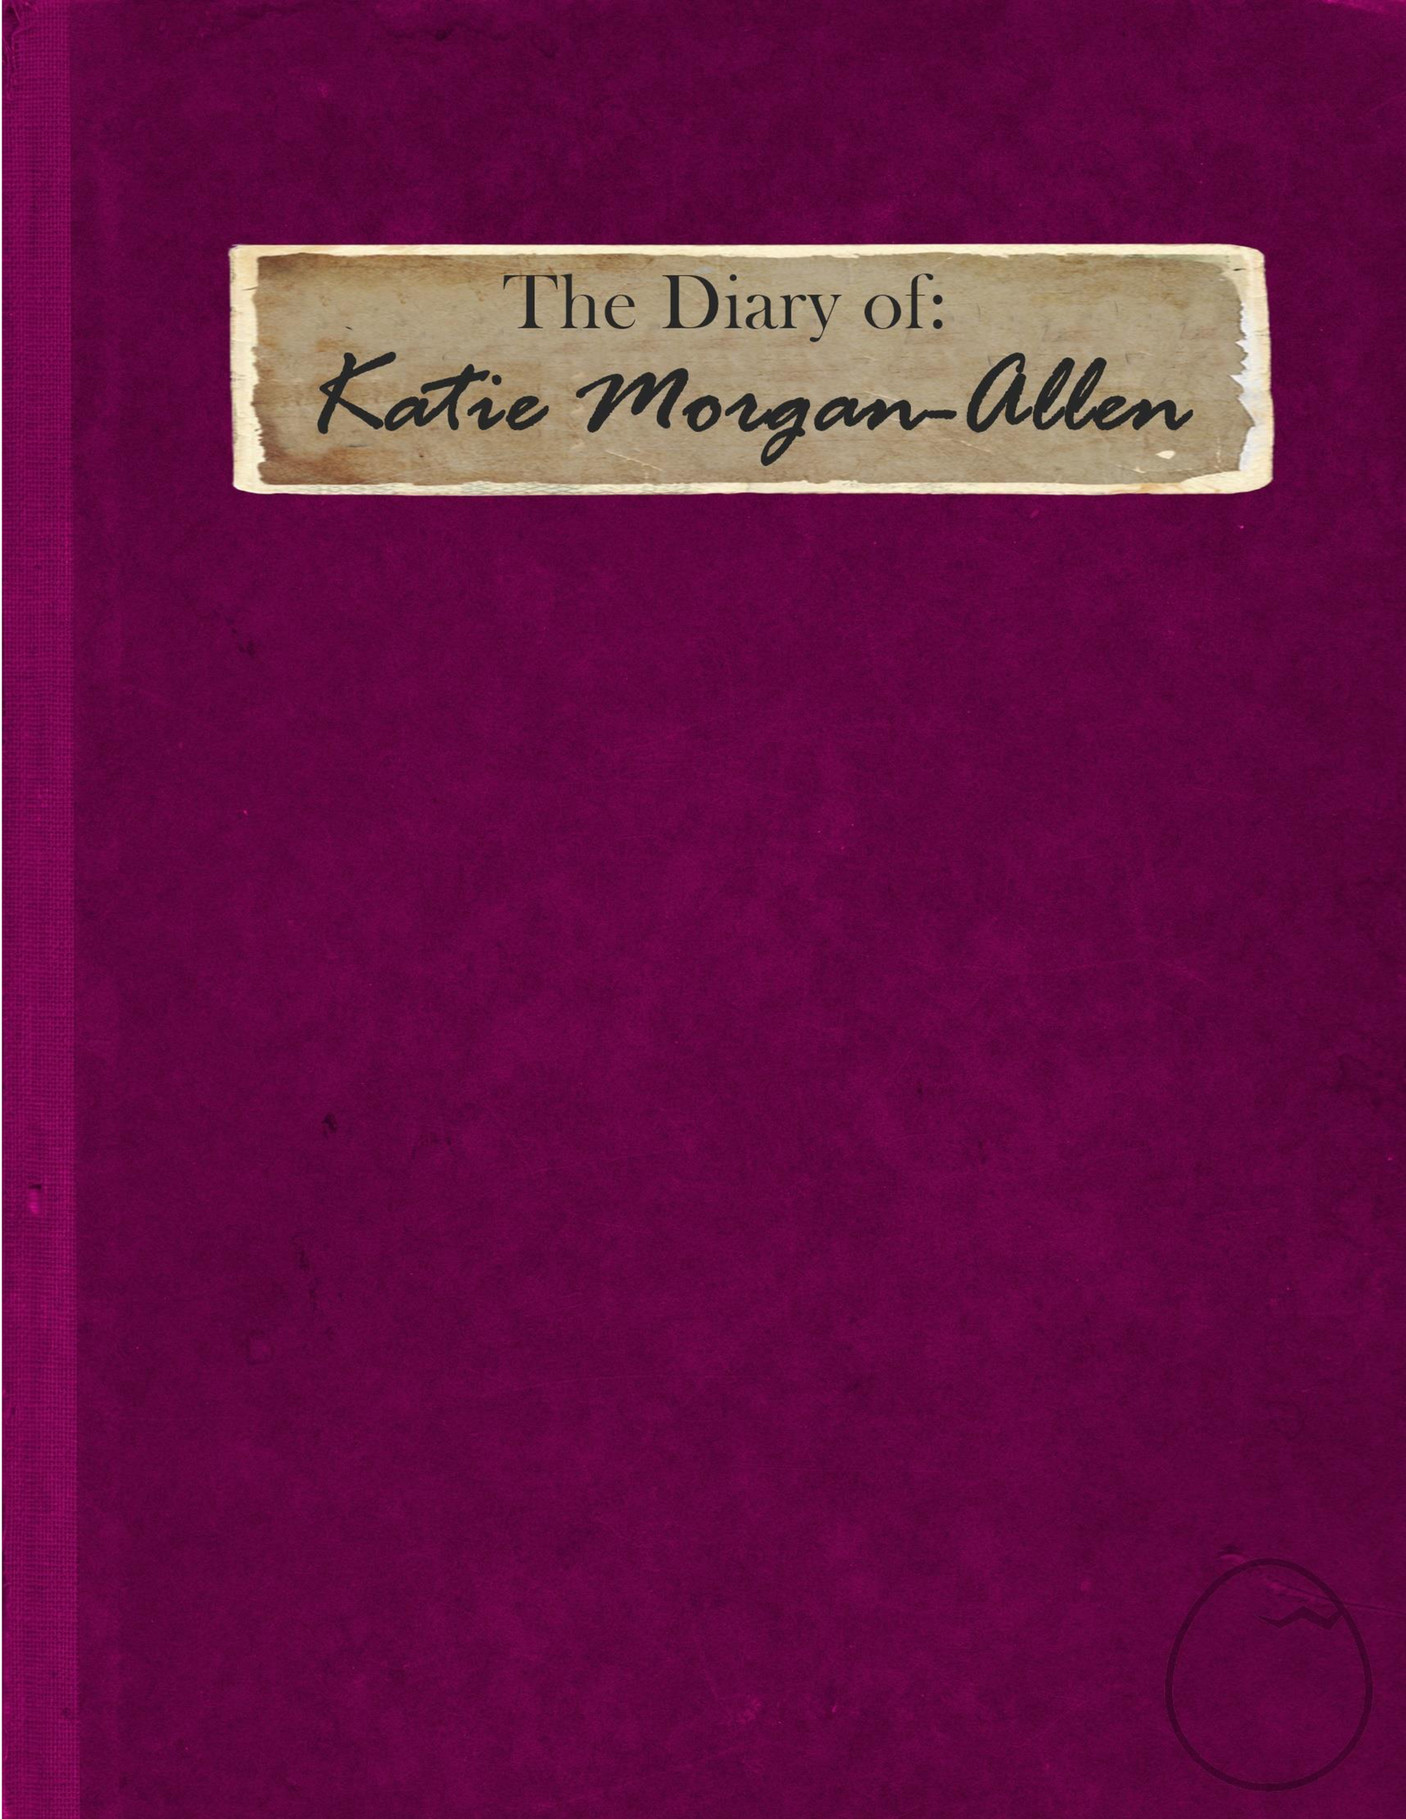 T Girl Publishing Diary Of Katie Morgan Allen Page 1 Created With